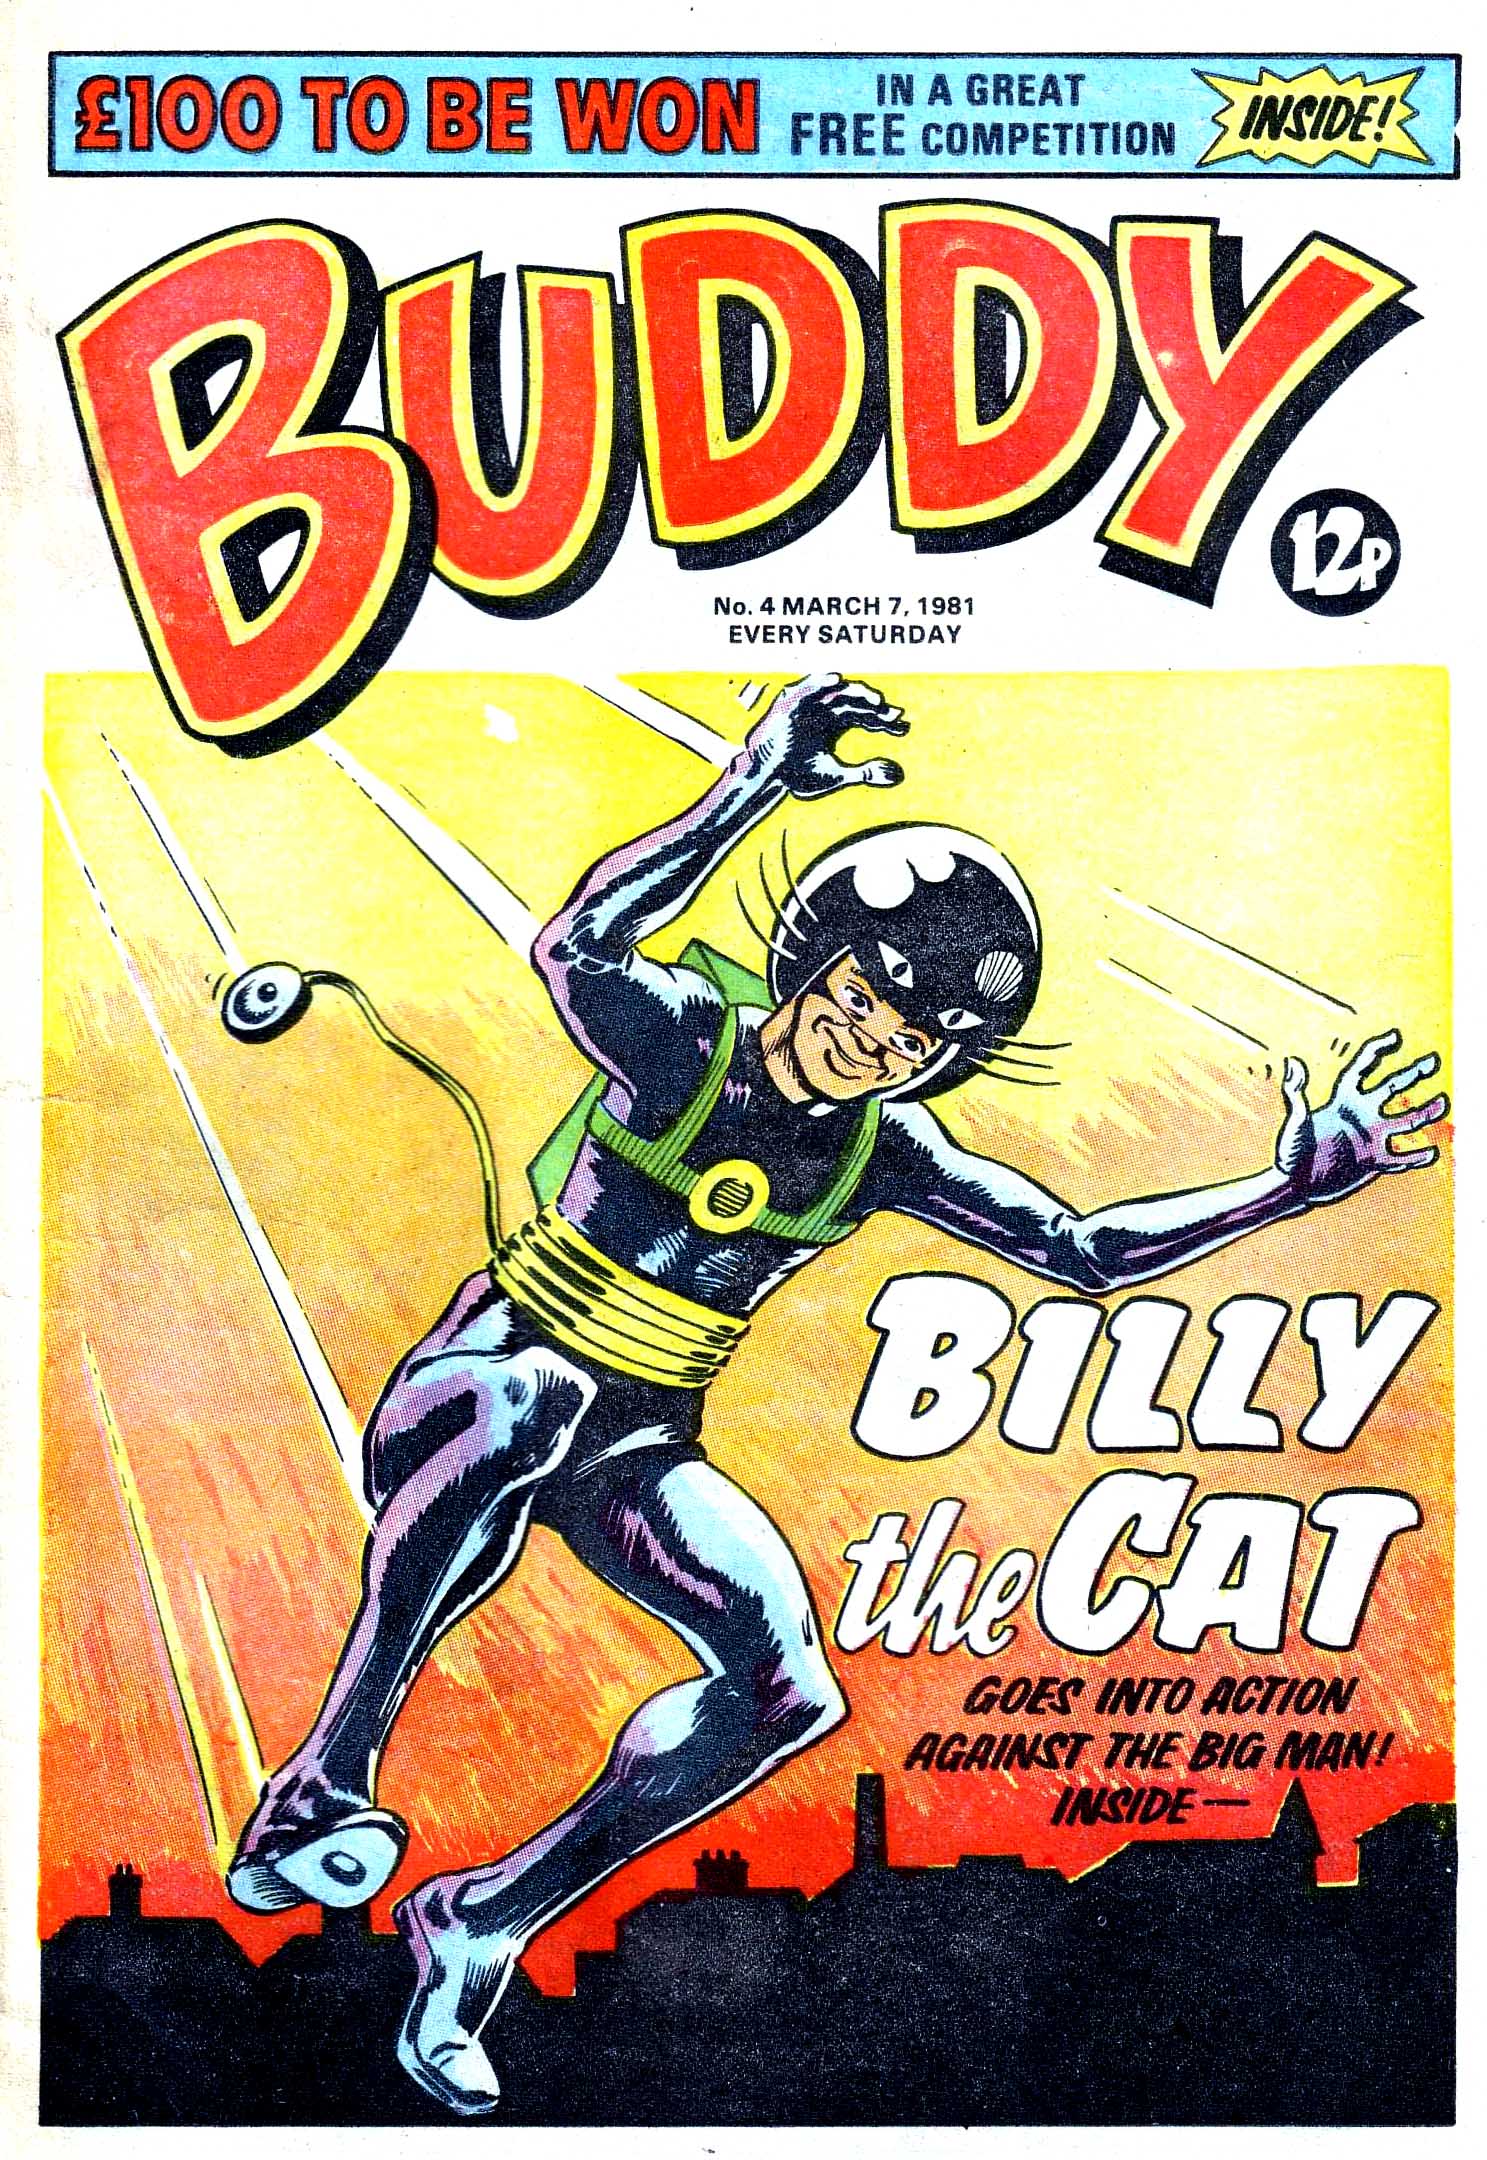 Read online Buddy comic -  Issue #4 - 1